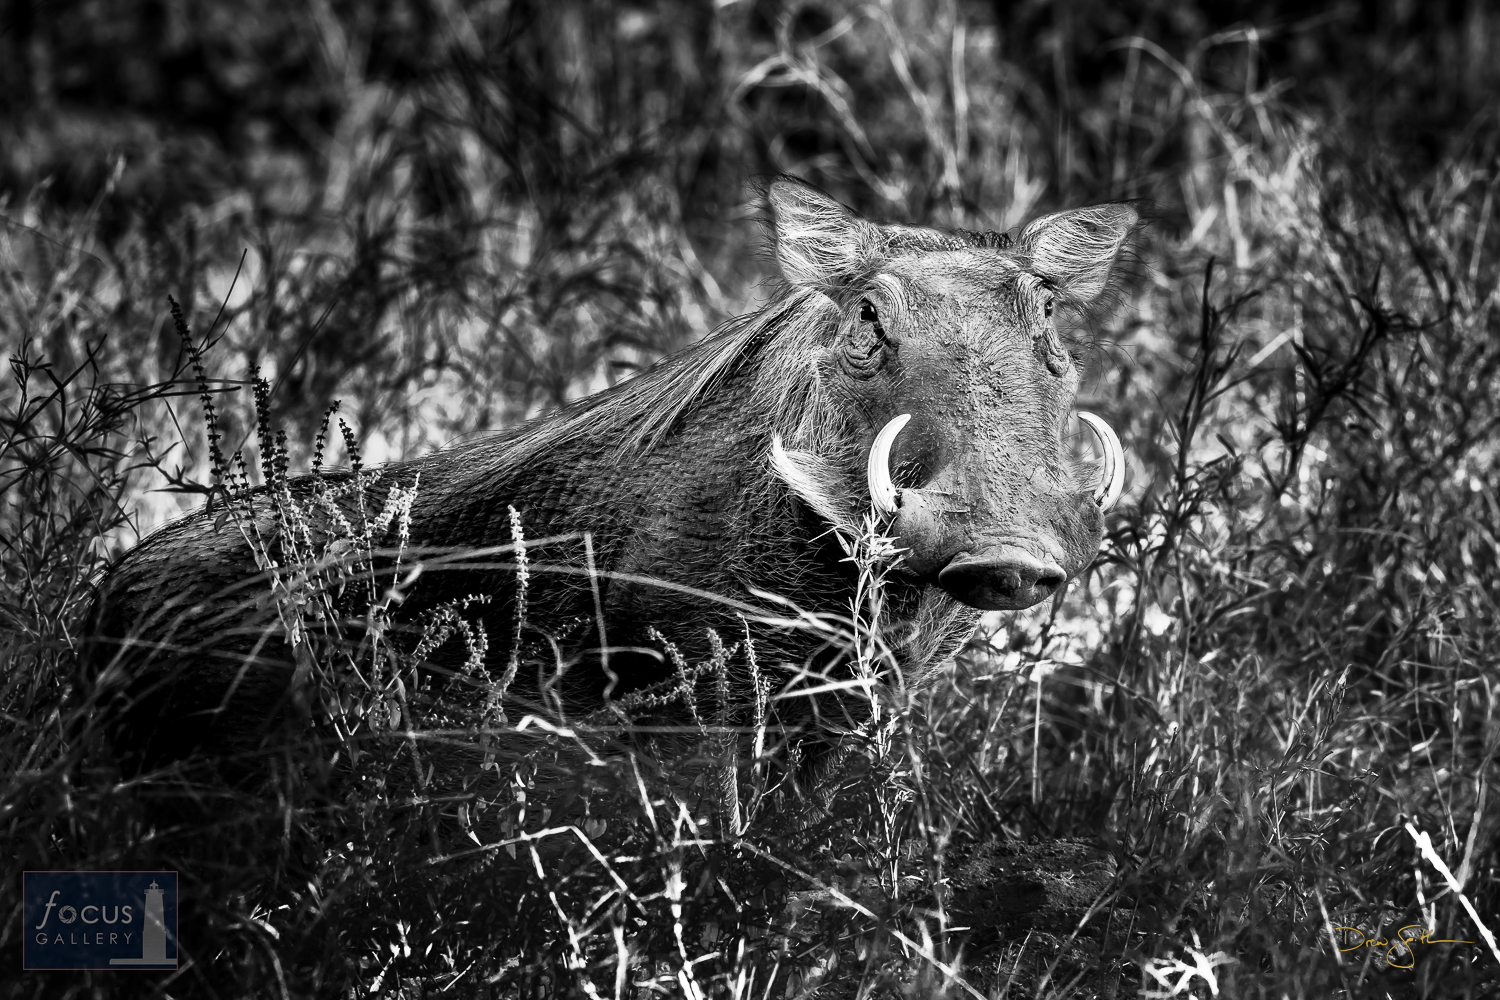 A warthog peers out from the bush.